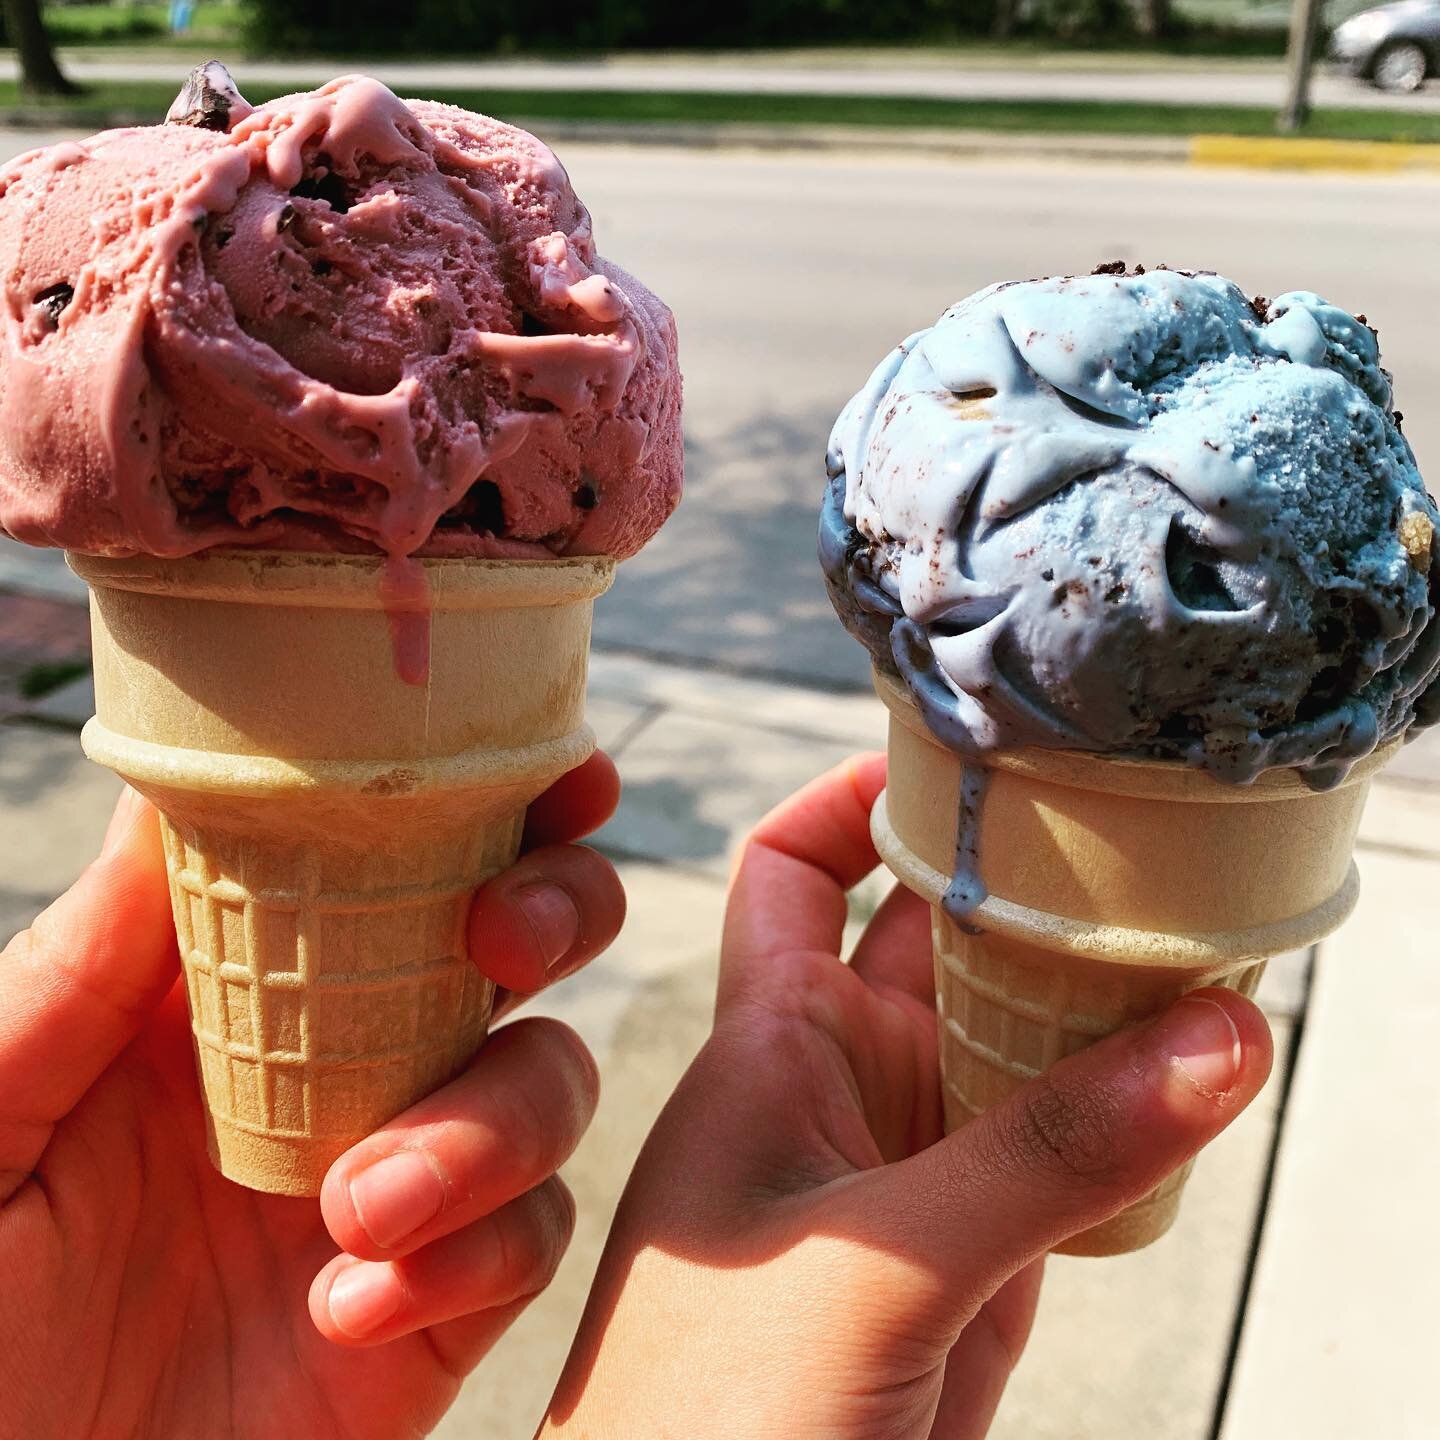 Cool off on this hot summer day at Triple Scoop&rsquo;d!  Come try Black Raspberry Chip or Cosmic Cookie ice cream!